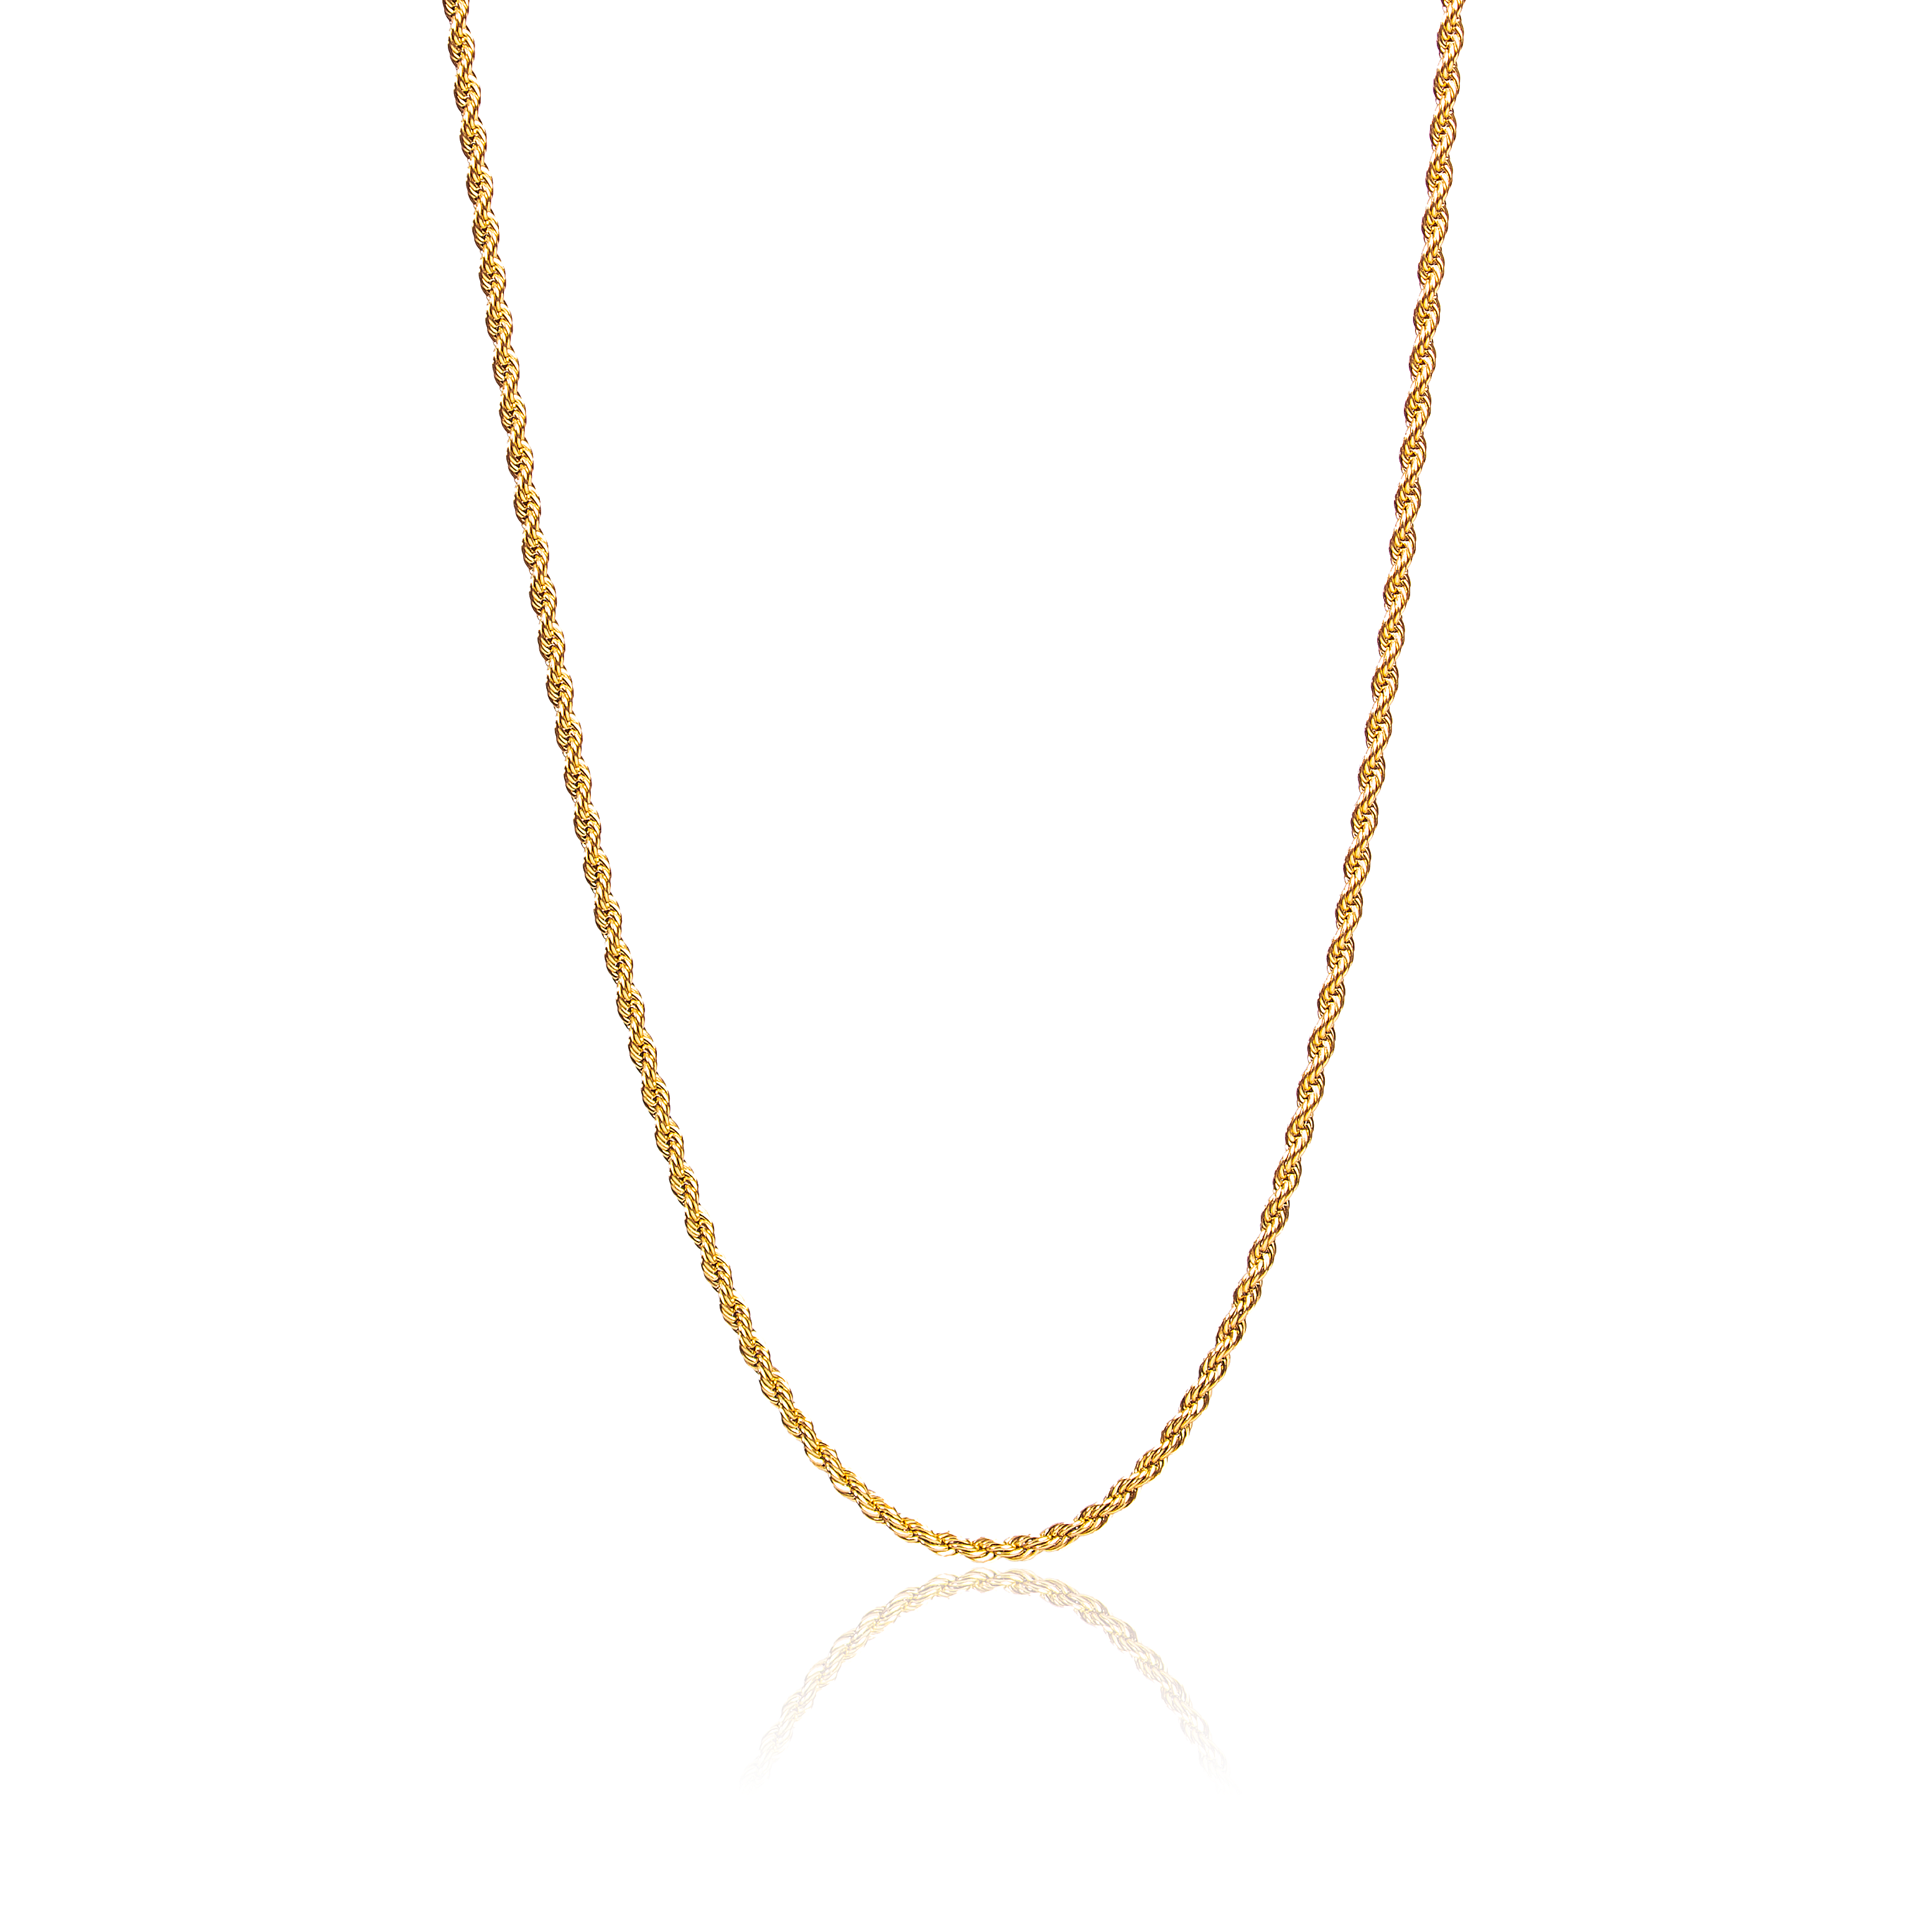 Simple yet elegant necklace features a delicate rope chain that is the perfect length for layering with VINTAGE necklace from our necklace collection (sold separately)  or wearing alone, making it an essential addition to your jewelry collection.  18K gold plated on stainless steel. Length: 20" Width: 3mm